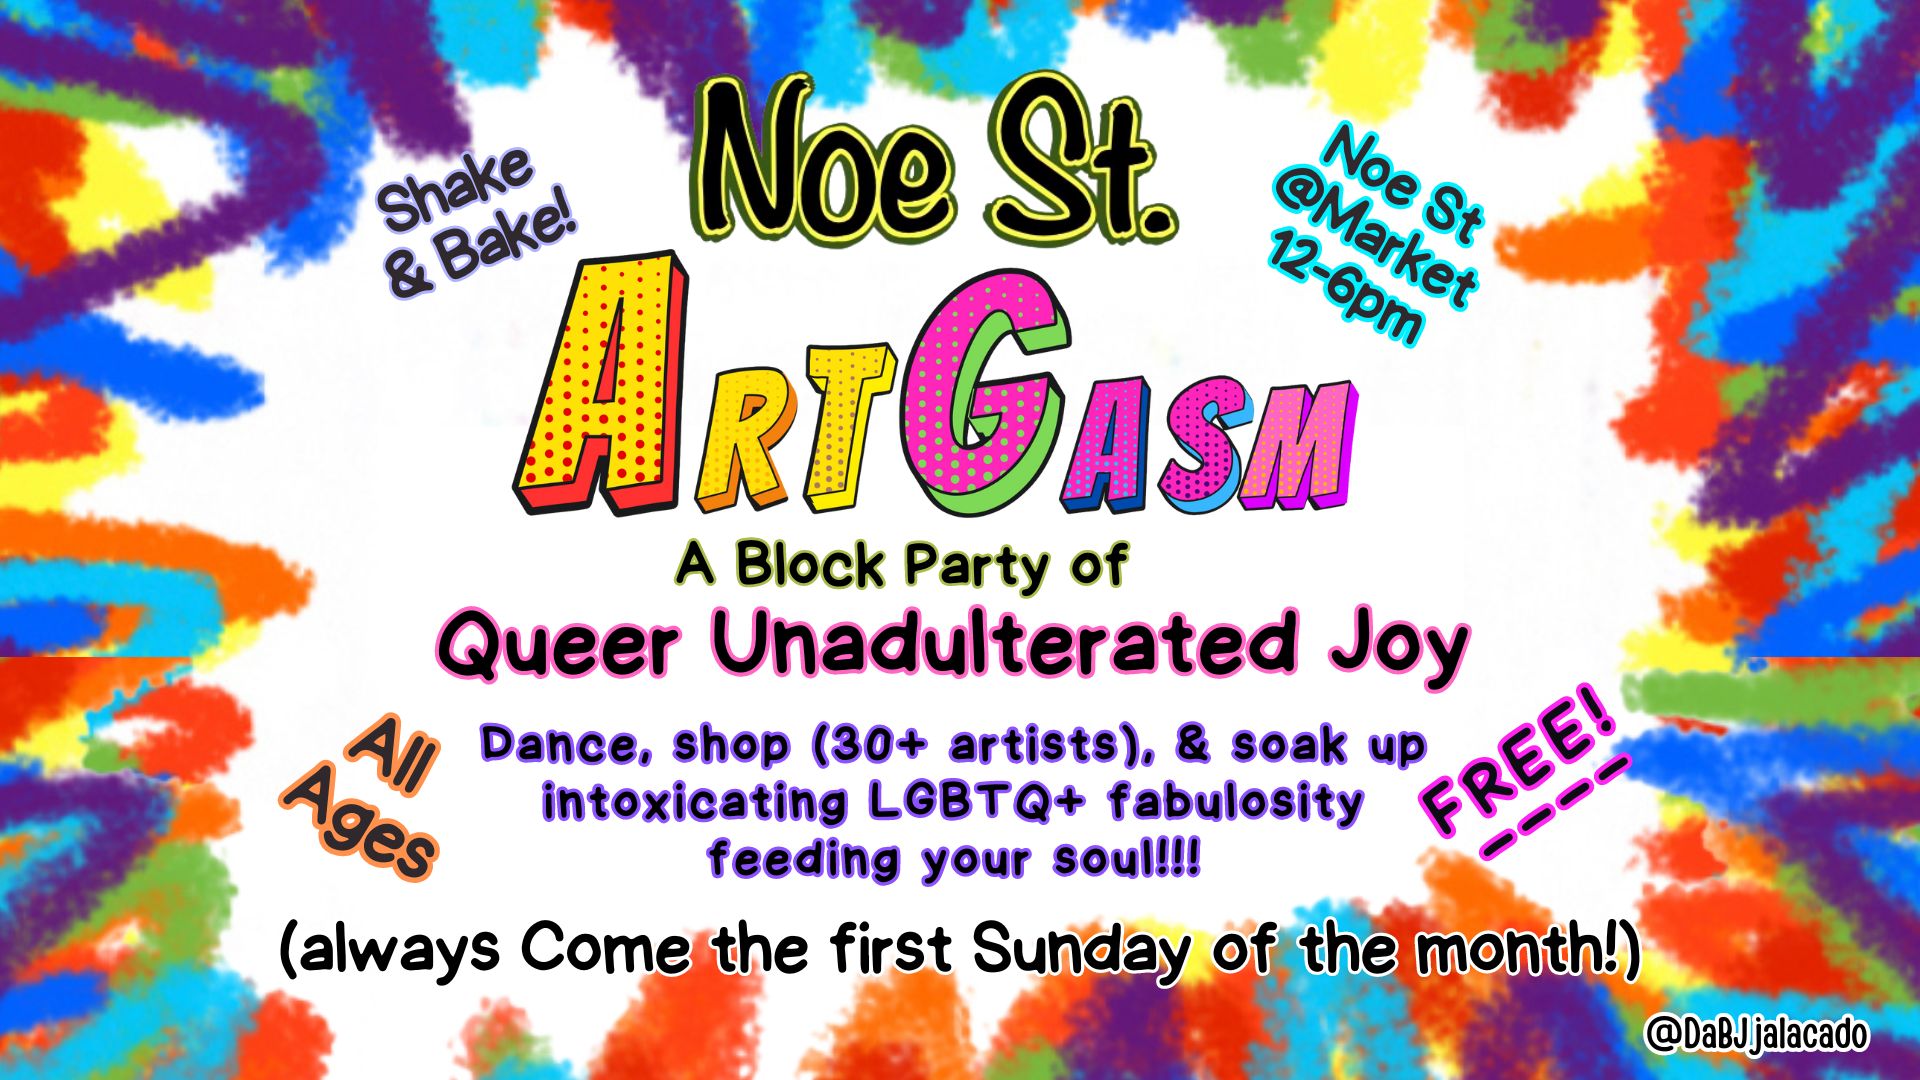 Noe St. ArtGasm: A Queer Unadulterated Joy Block Party, San Francisco, California, United States